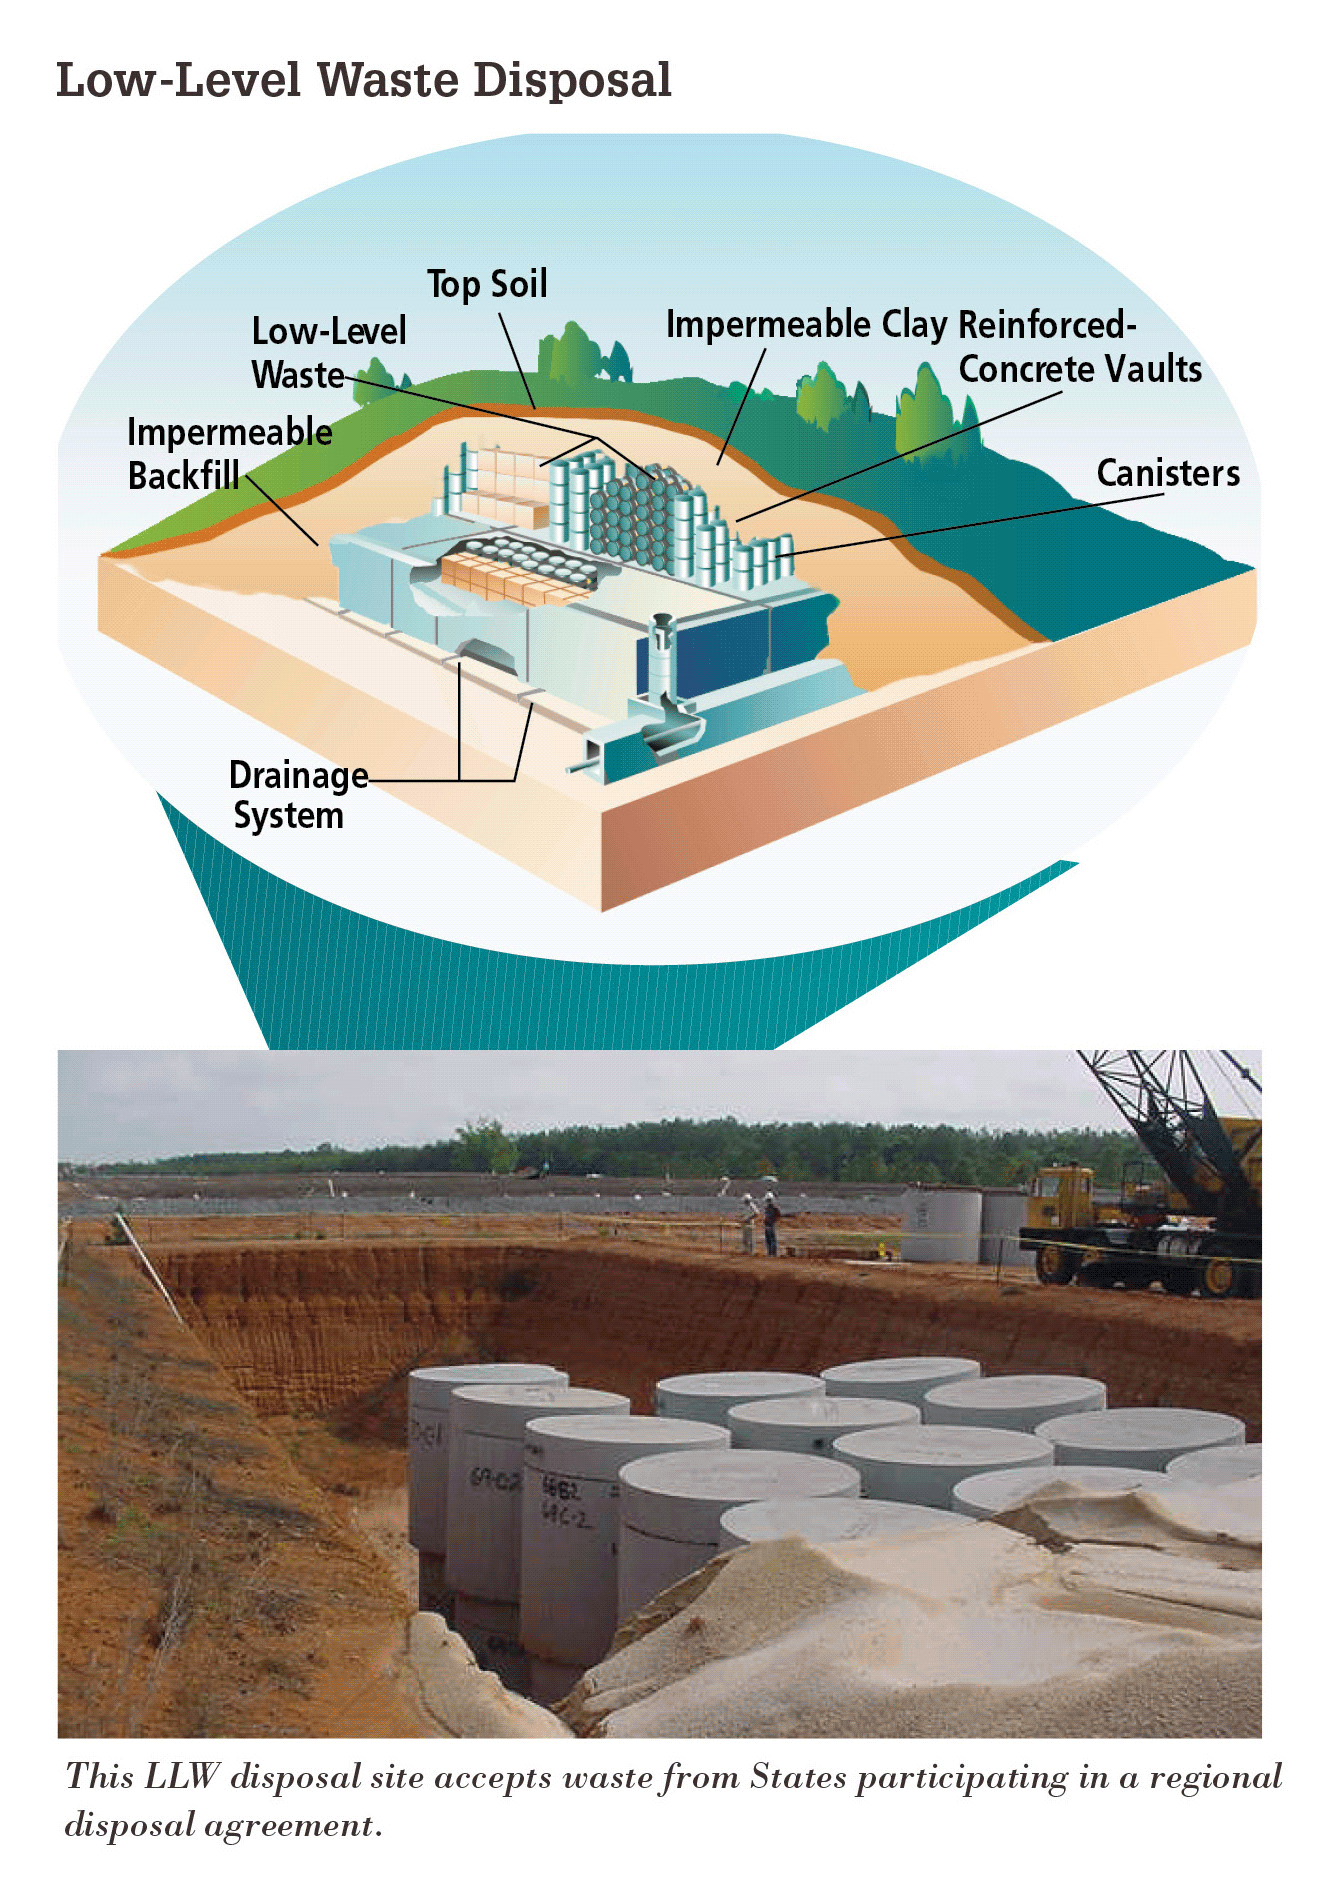 Section of a low-level radioactive waste disposal facility